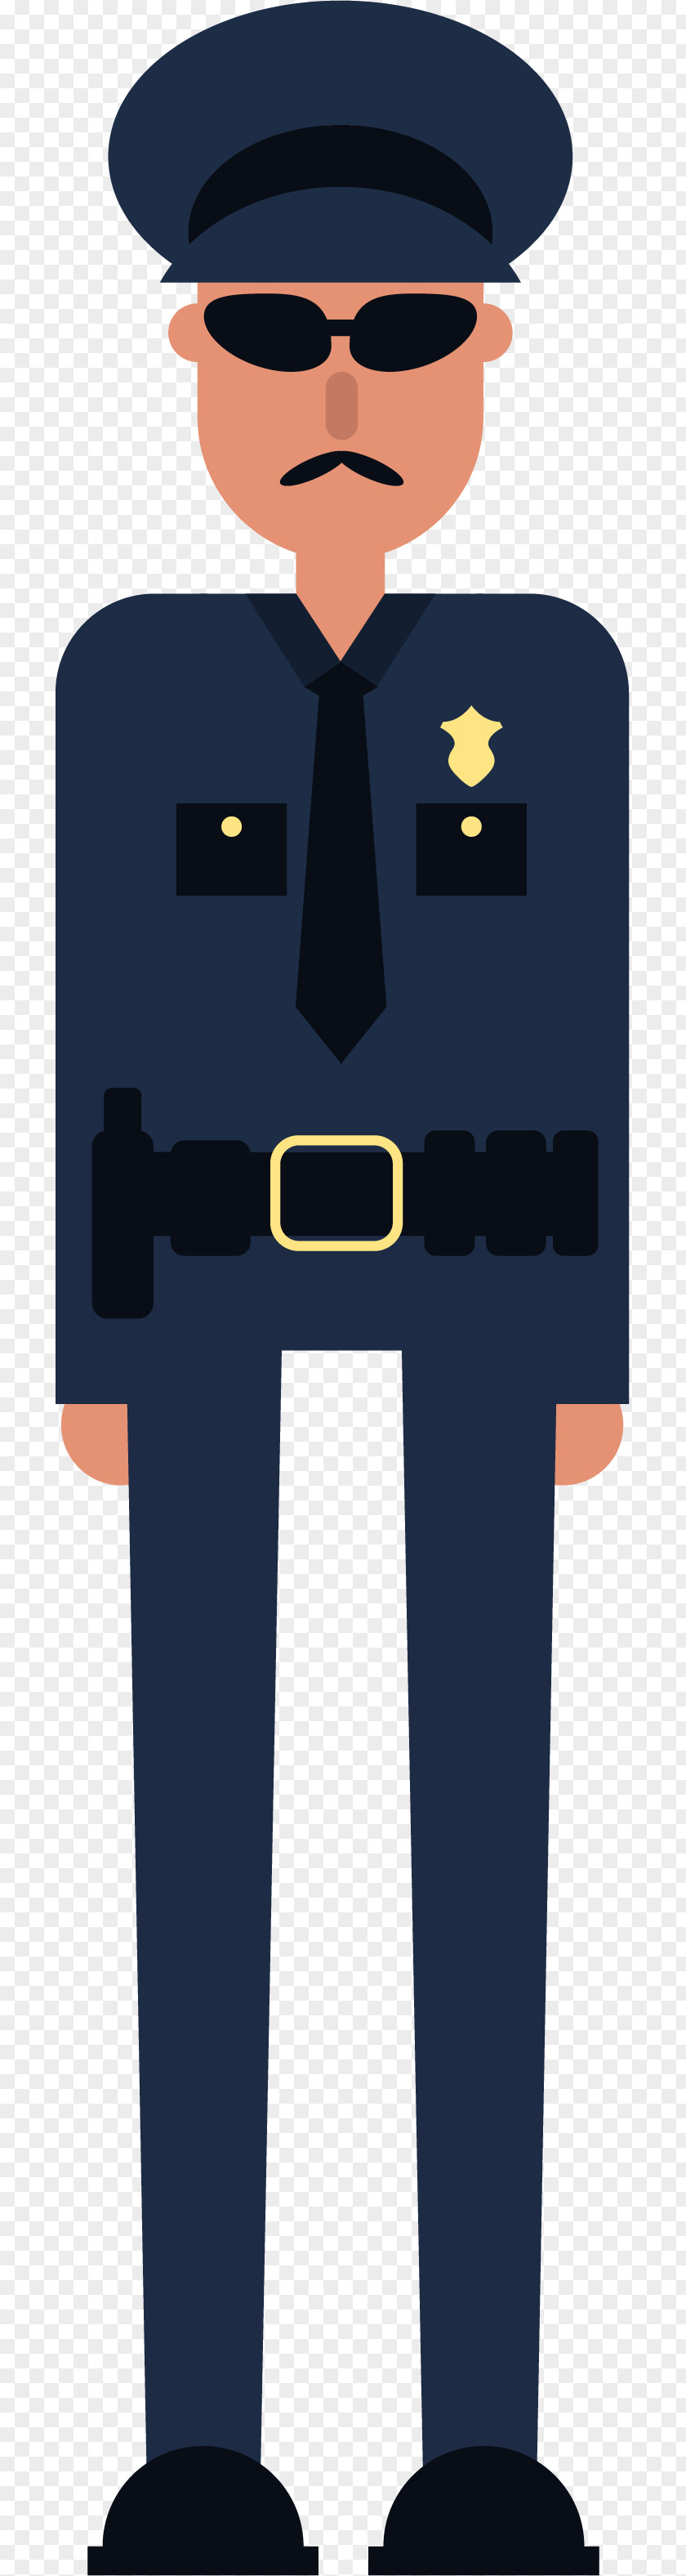 Sergeant Police Officer Cartoon PNG